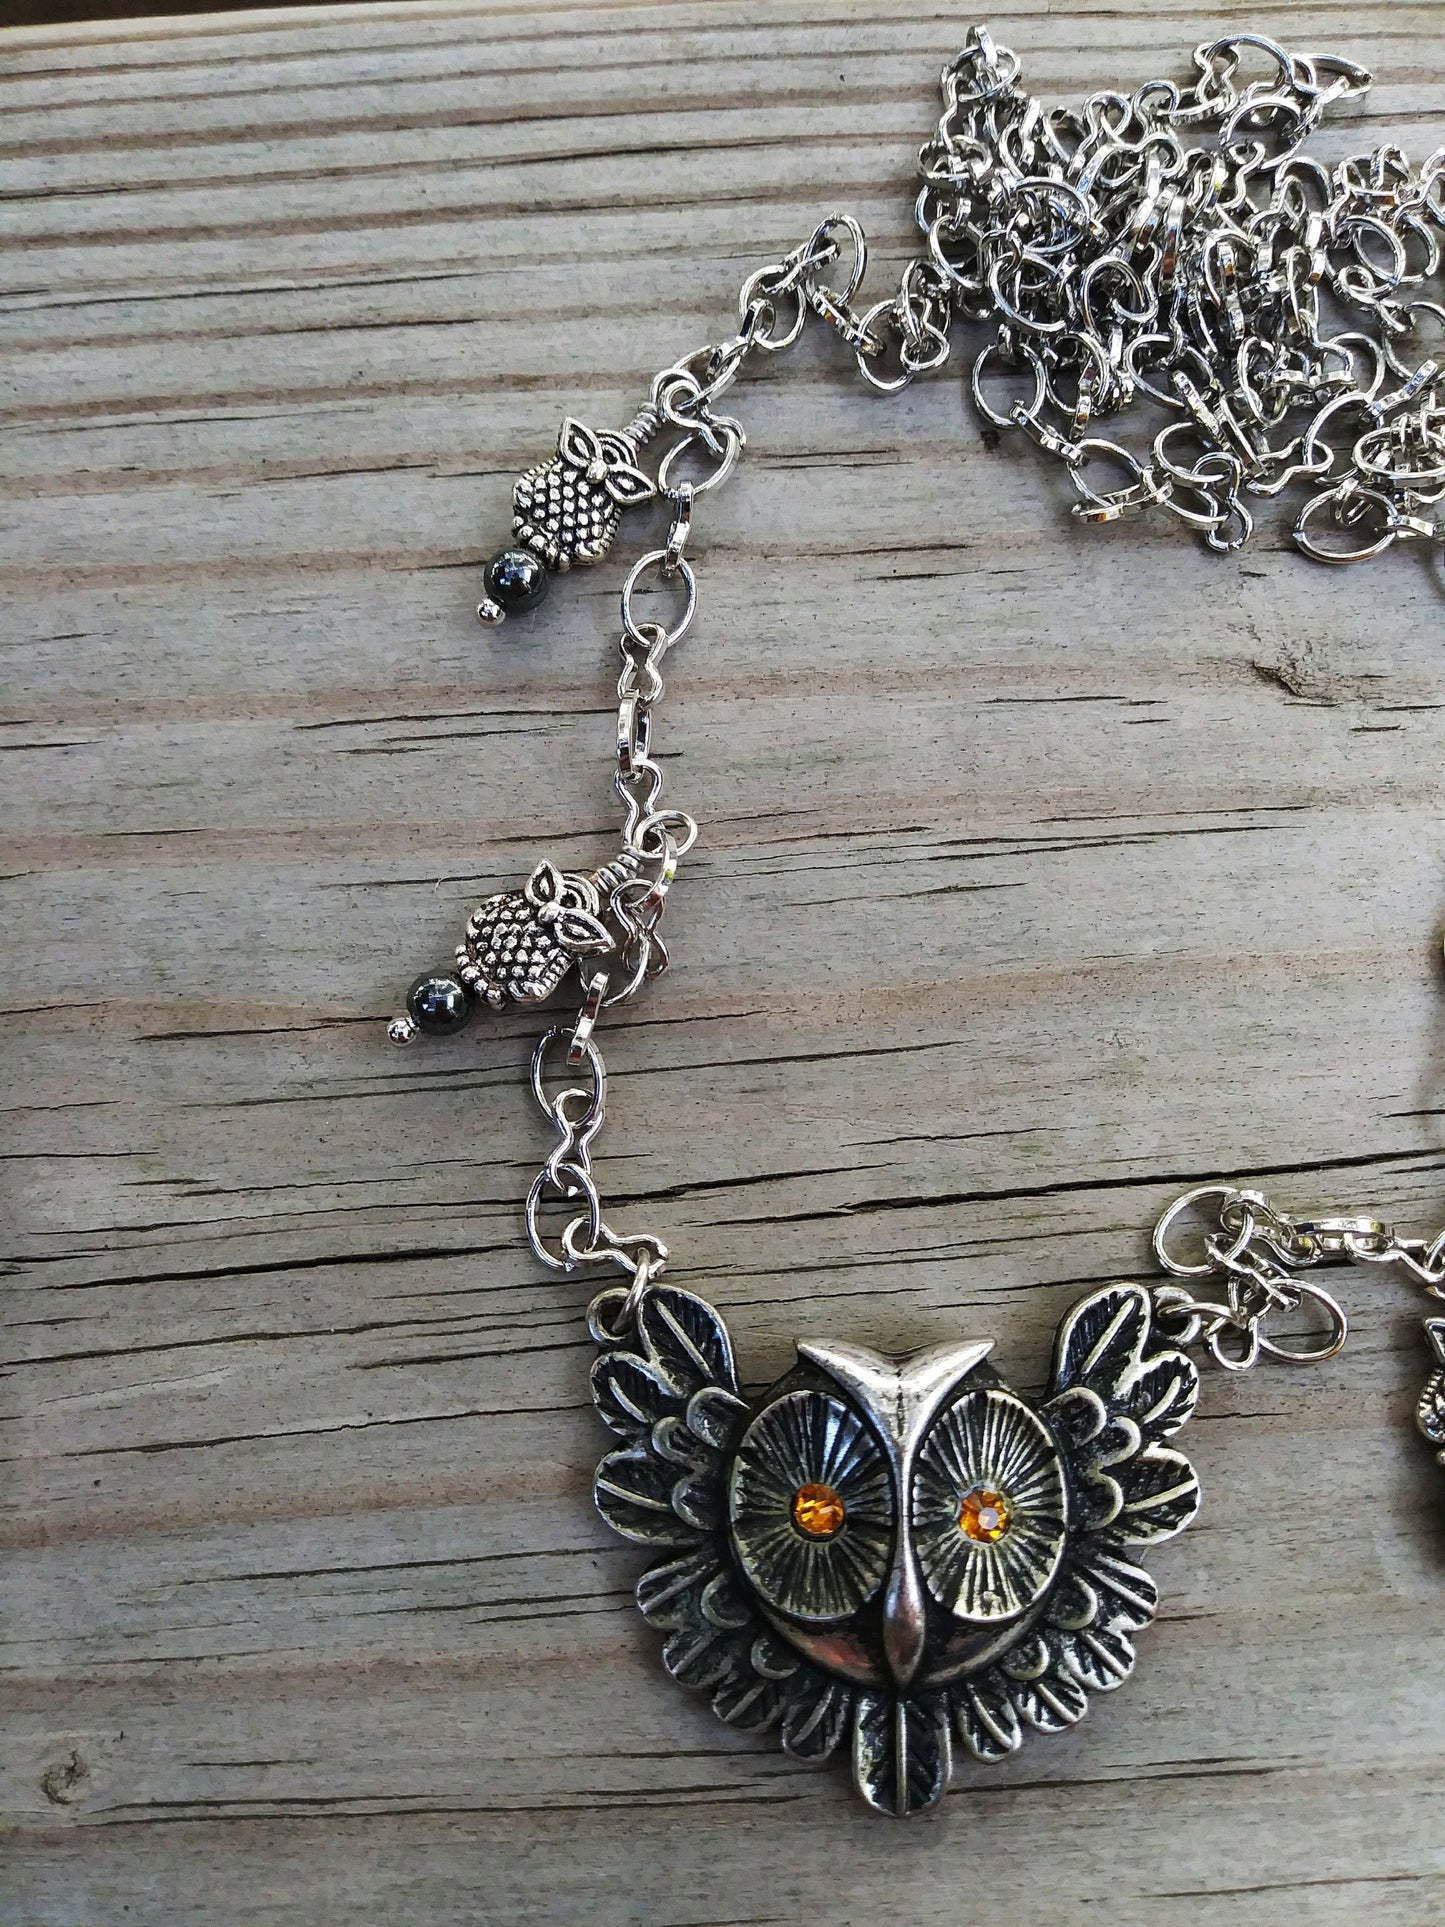 Upcycled Silver Owl Assemblage Necklace w Hematite Accents